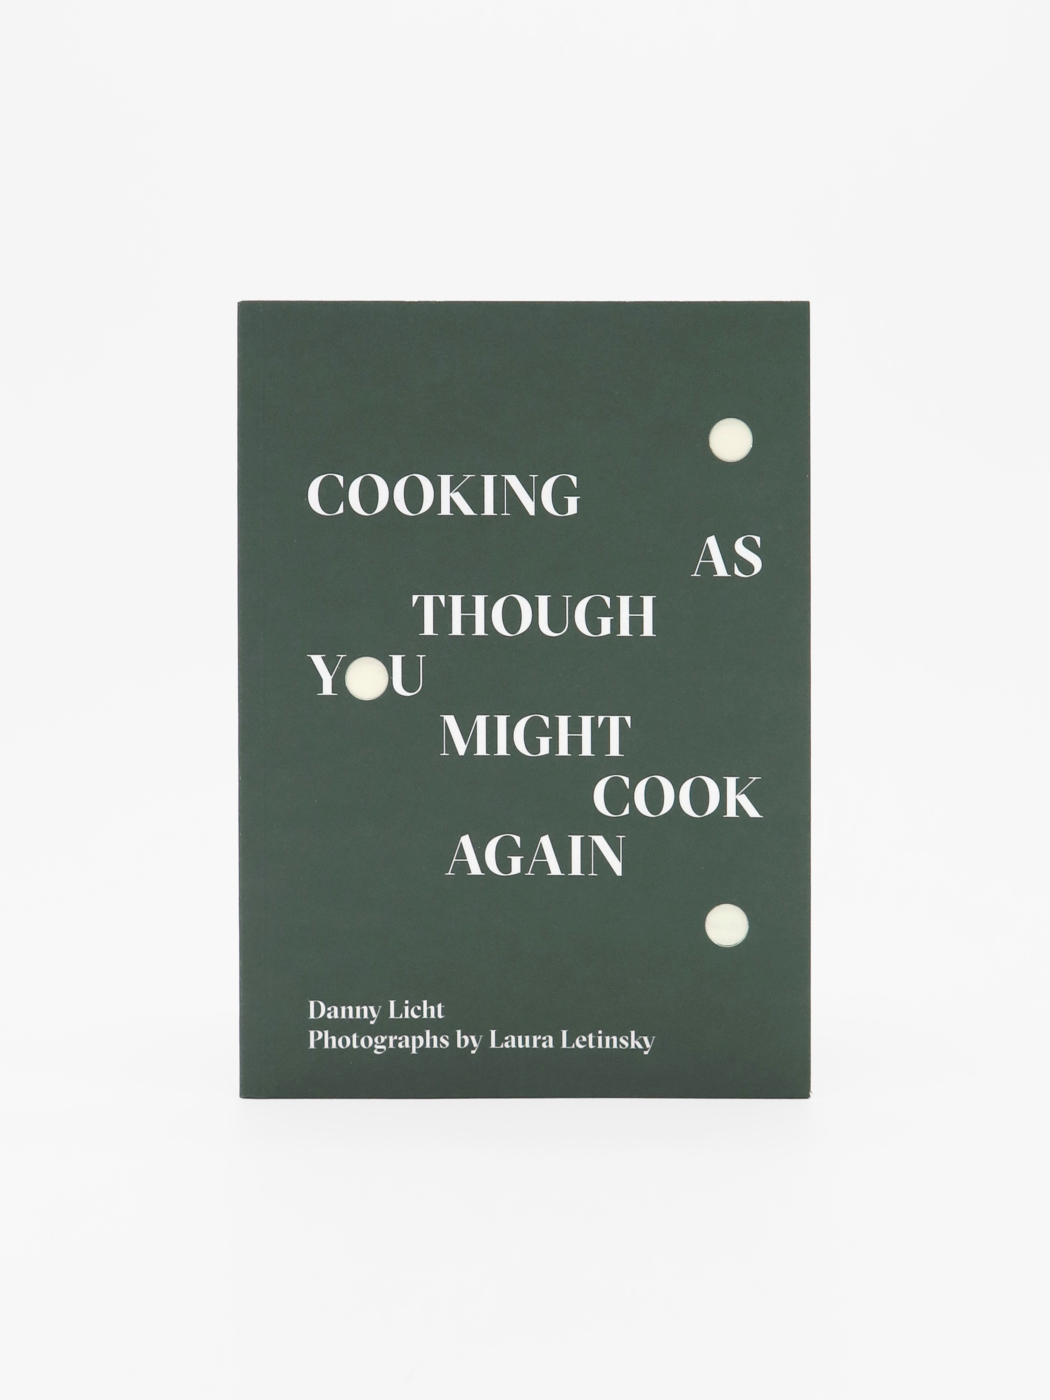 Danny Licht, Cooking As Though You Might Cook Again